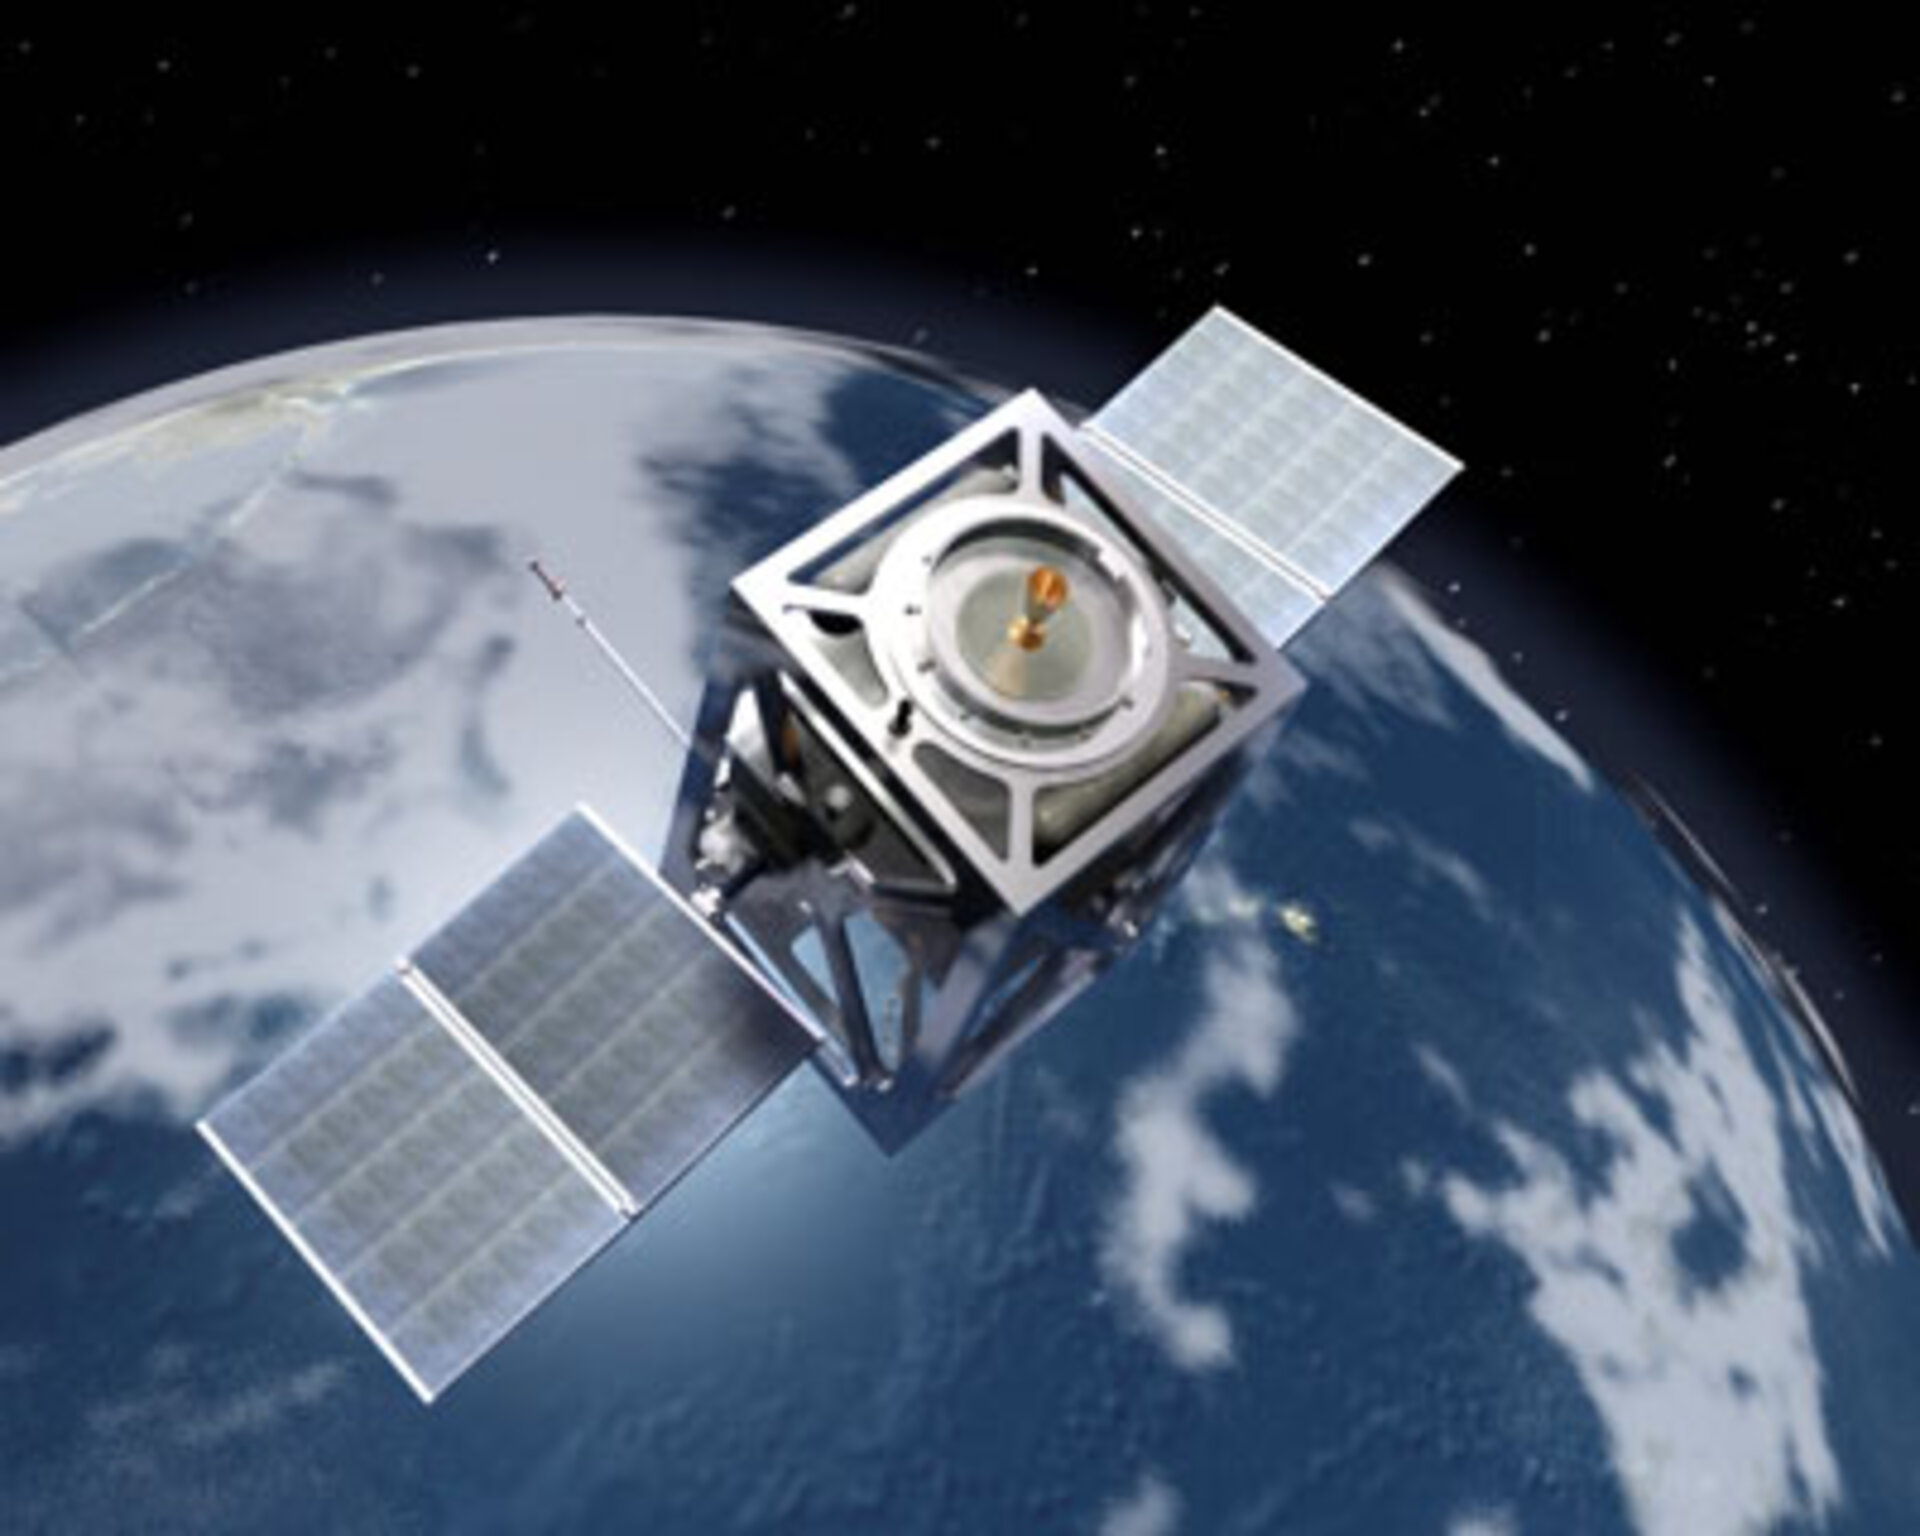 Artist's impression of the ESEO satellite imagined by SSETI students